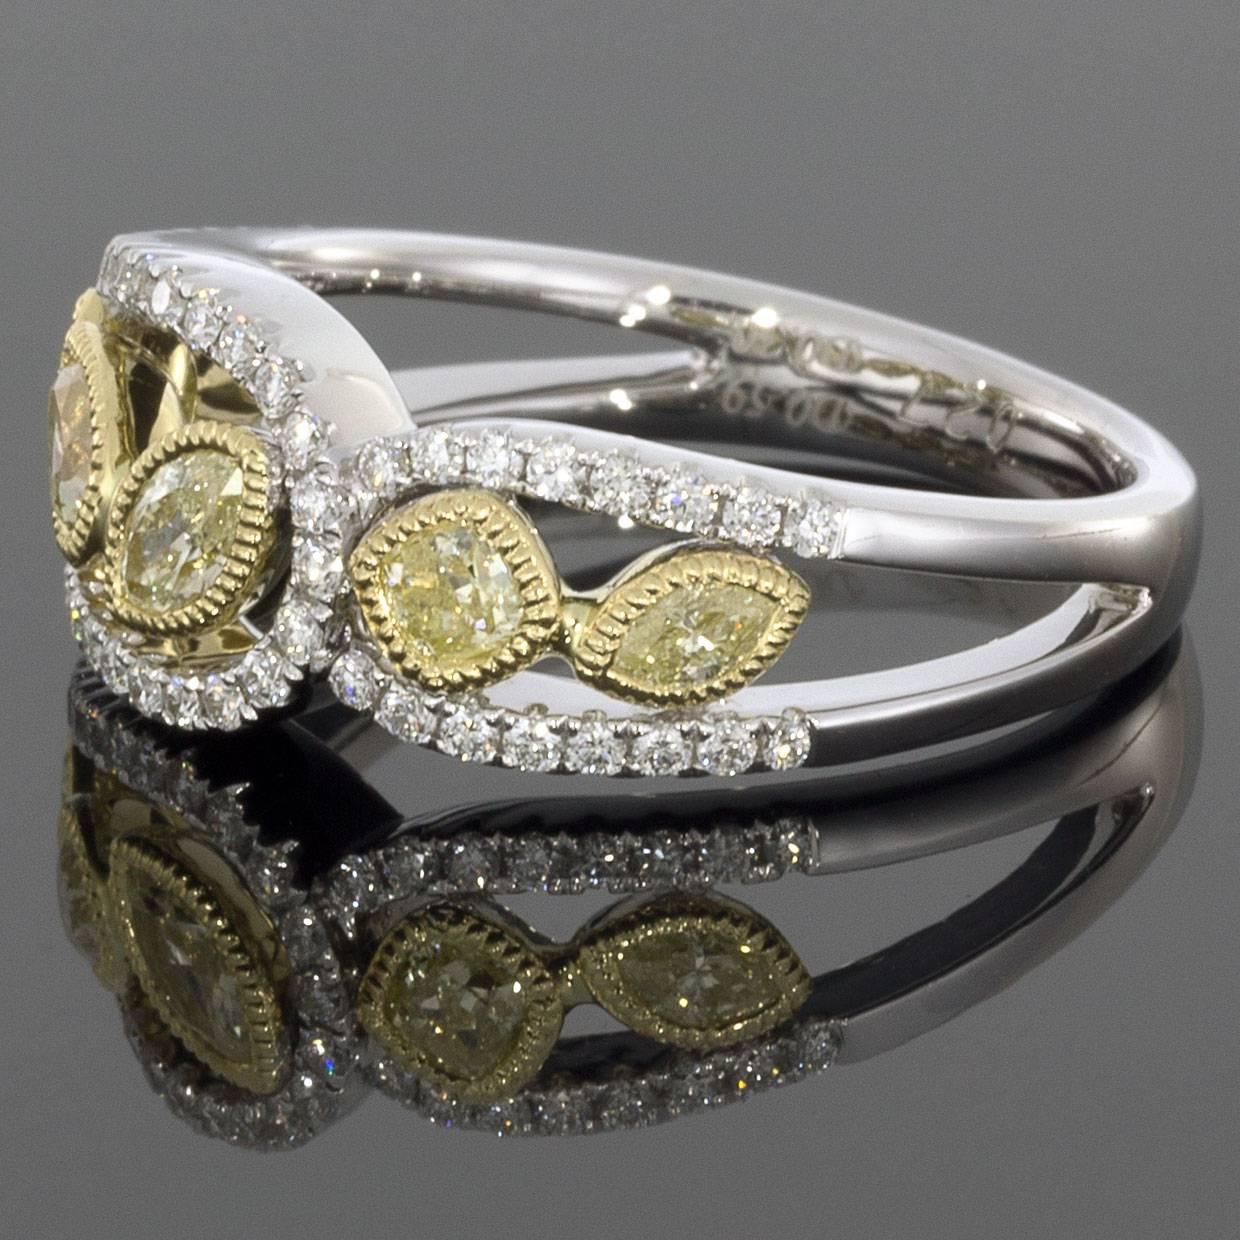 This beautiful ring is made of yellow & white diamonds and set in yellow & white gold.  The diamonds are marquise, cushion and pear-shaped to create a captivating leaf like design of diamonds dancing across your finger.

DETAILS:
.89CTW Diamond